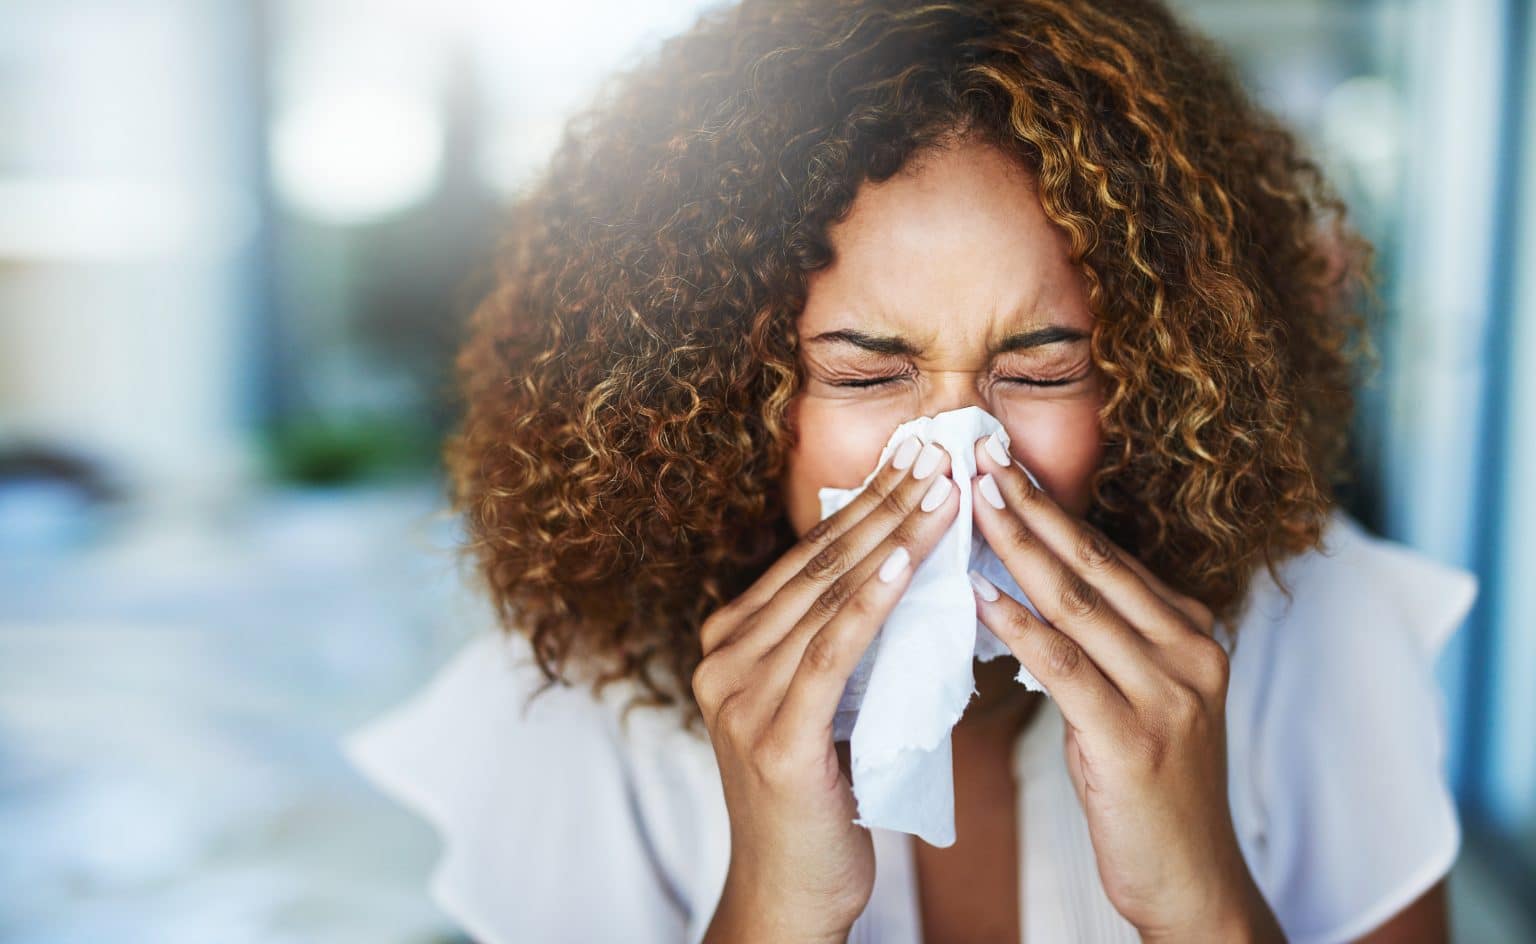 Shot of a woman using a tissue to sneeze in while experiencing post nasal drip.